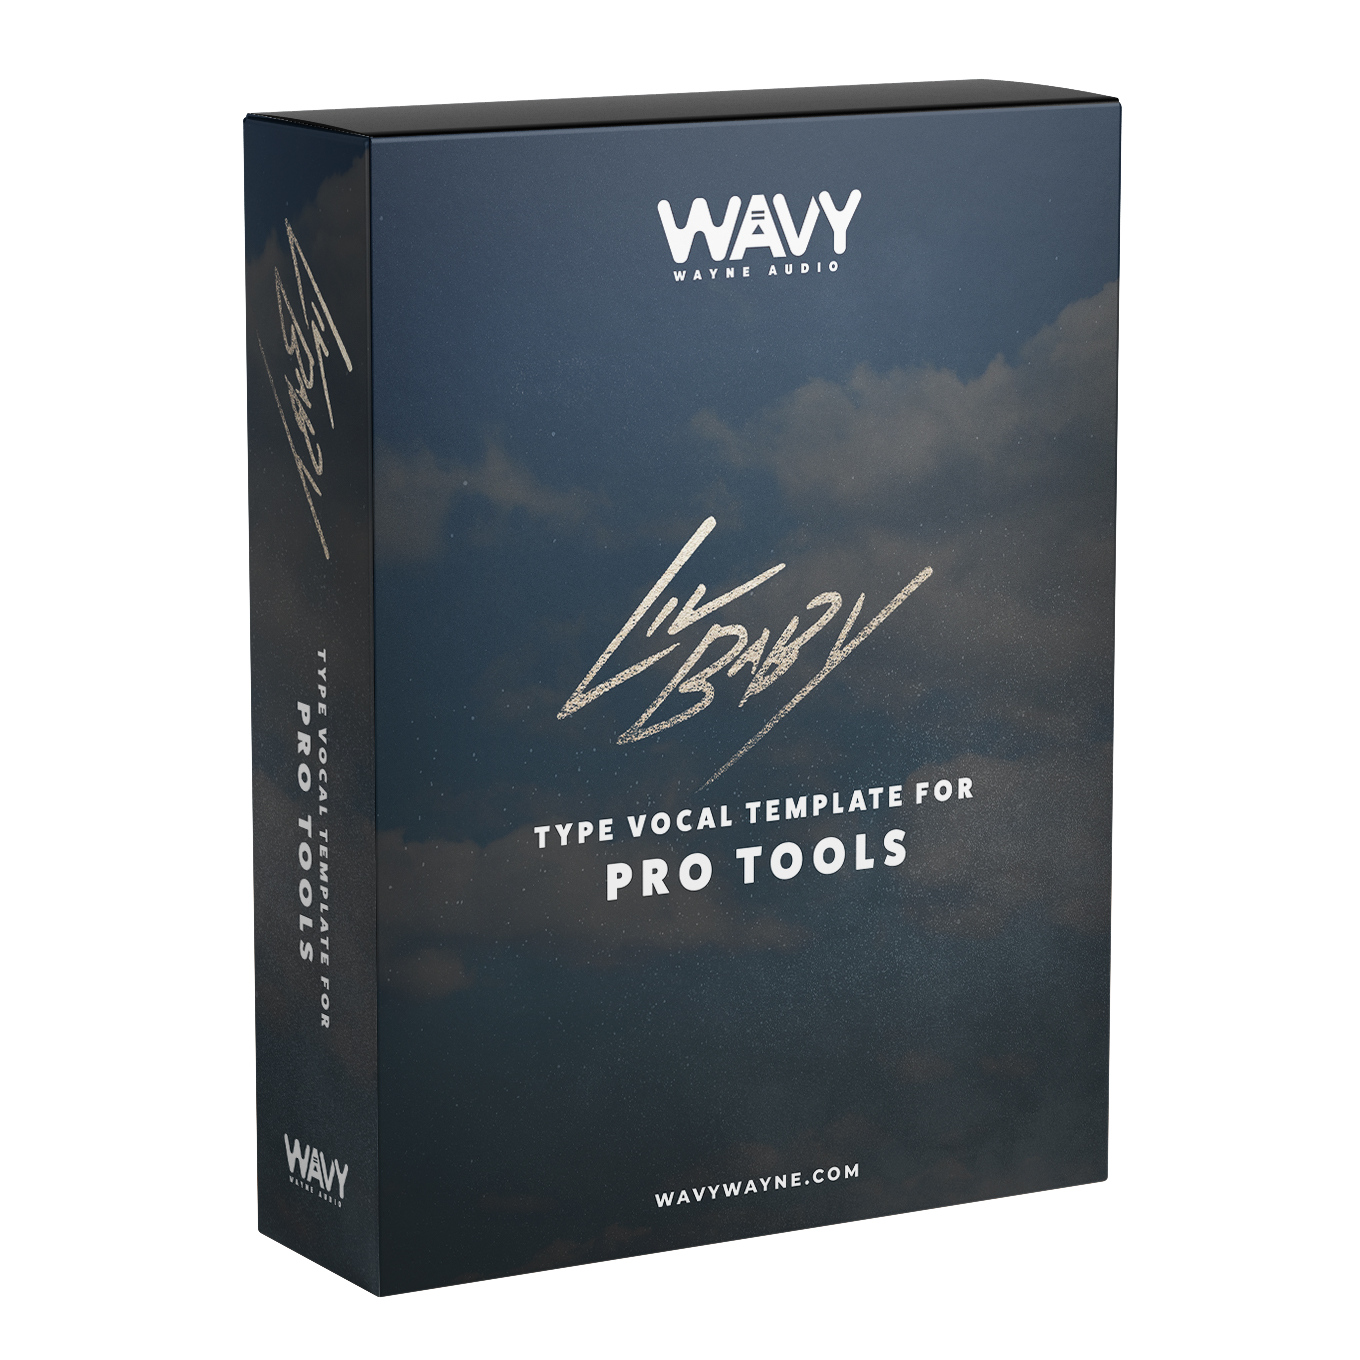 Lil Baby Type Vocal Template for Pro Tools